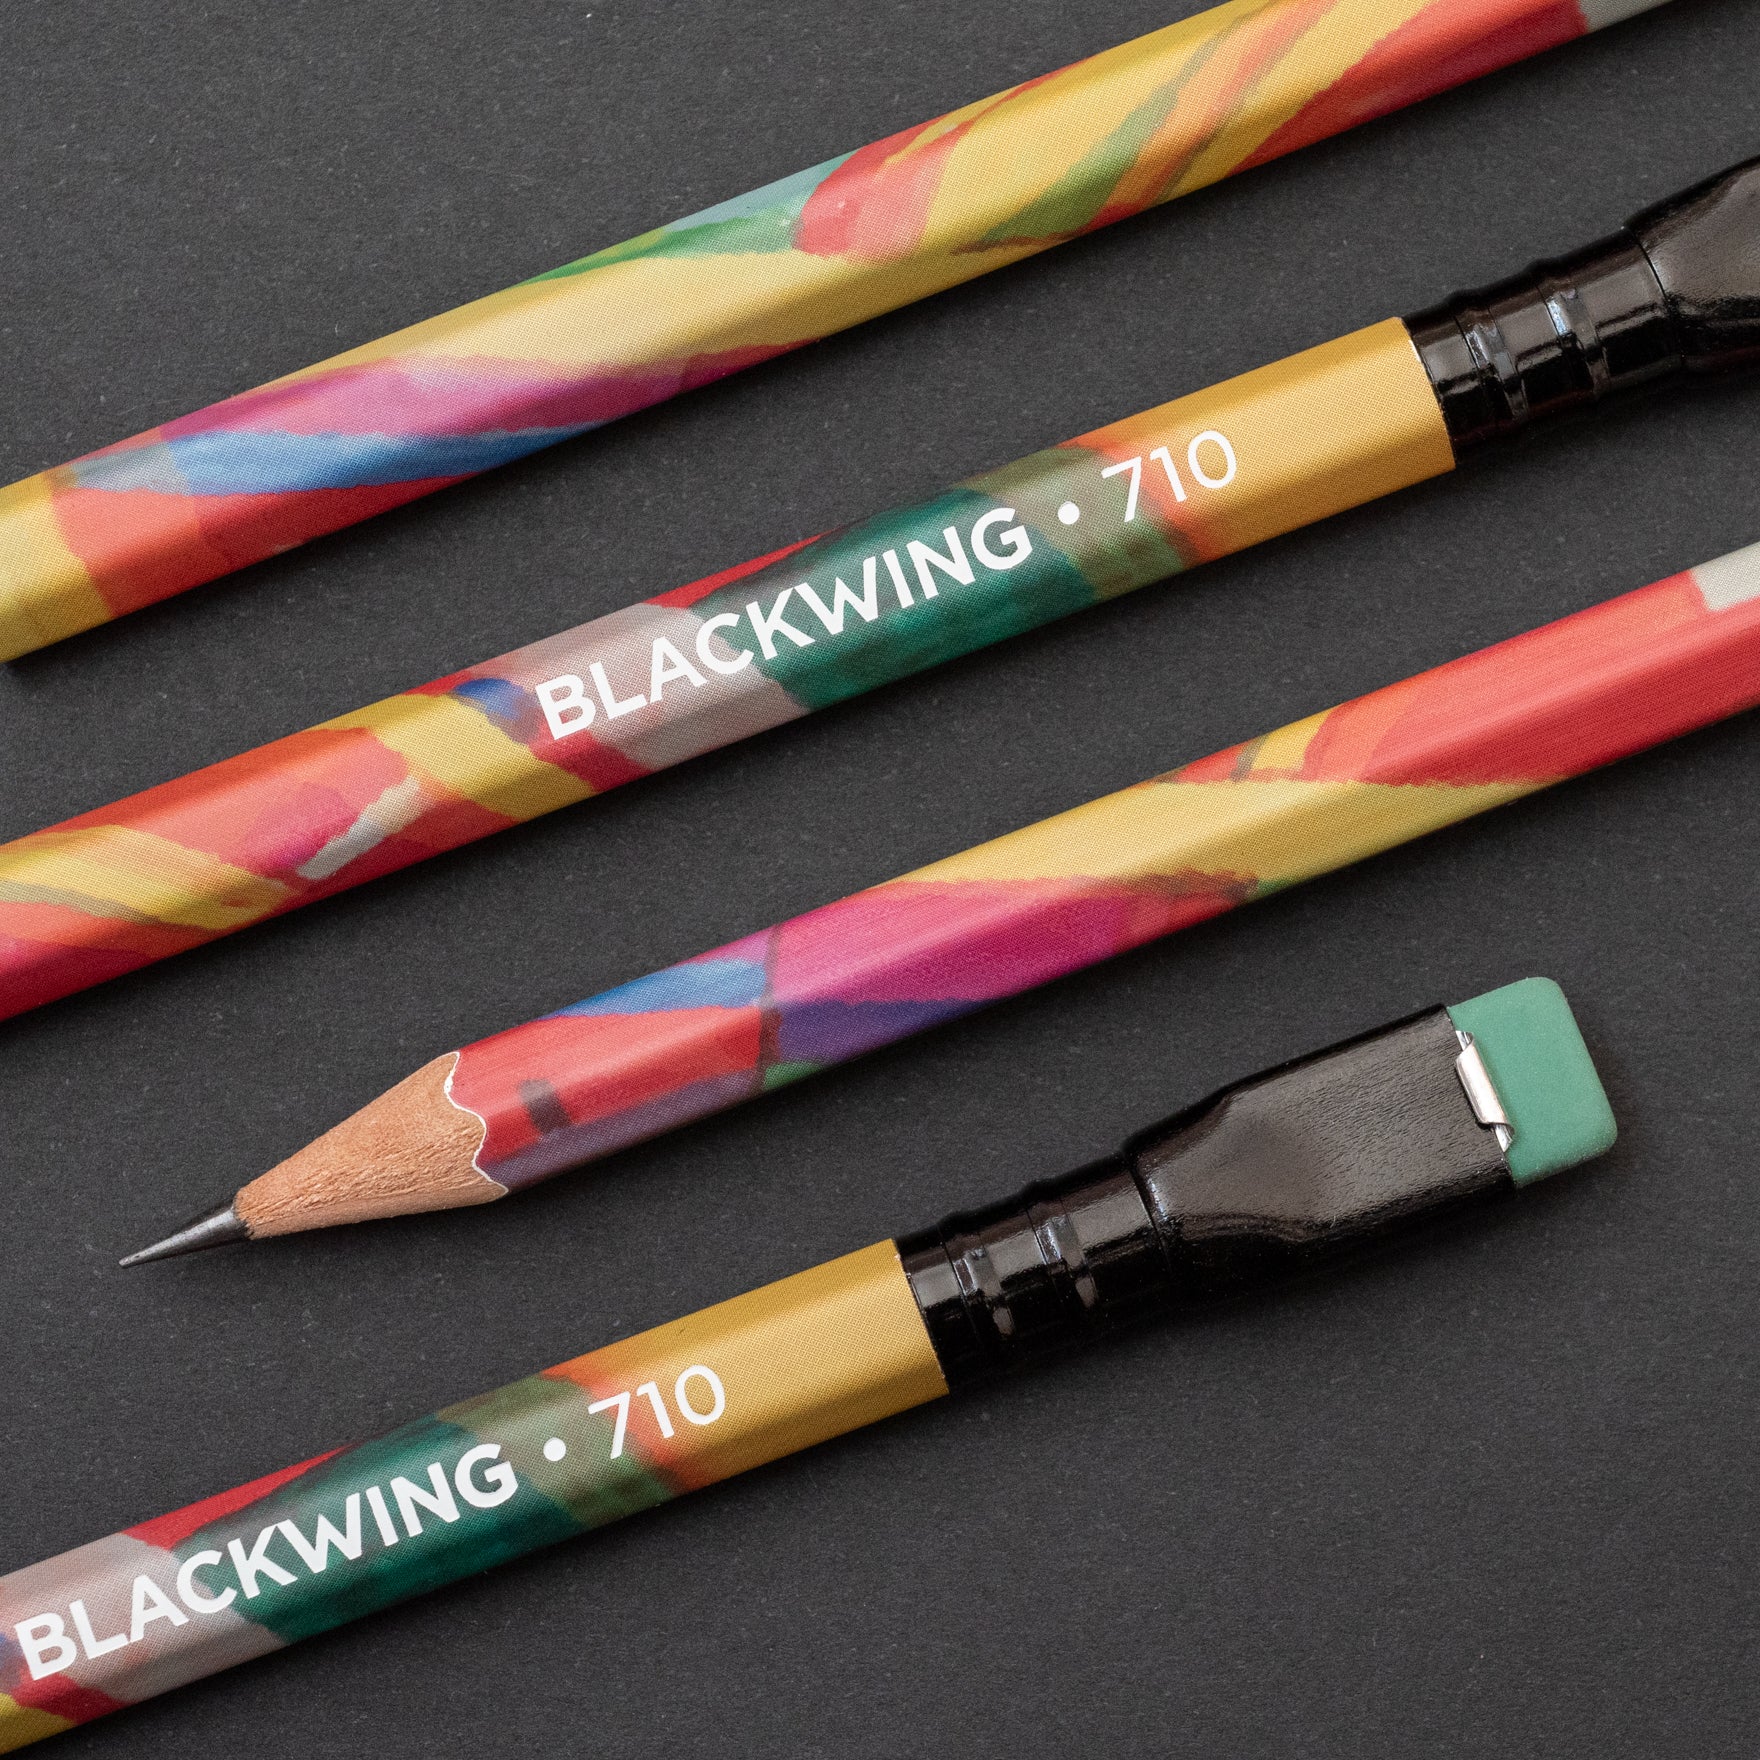 Three Blackwing Volume 710 (Set of 12) Grateful Dead pencils, two unsharpened and one sharpened with an exposed graphite tip, resting on a dark surface.